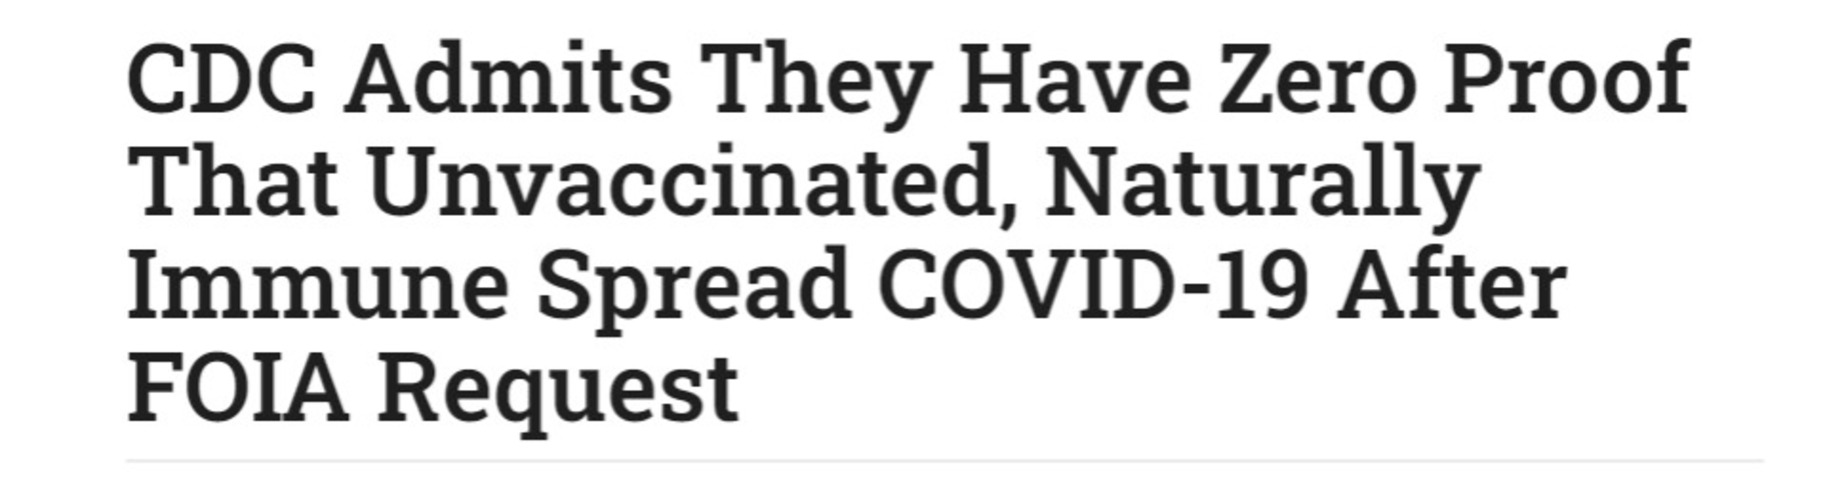 CDC Admits  Zero Proof That Unvaccinated, Naturally Immune Spread COVID-19 After FOIA Request